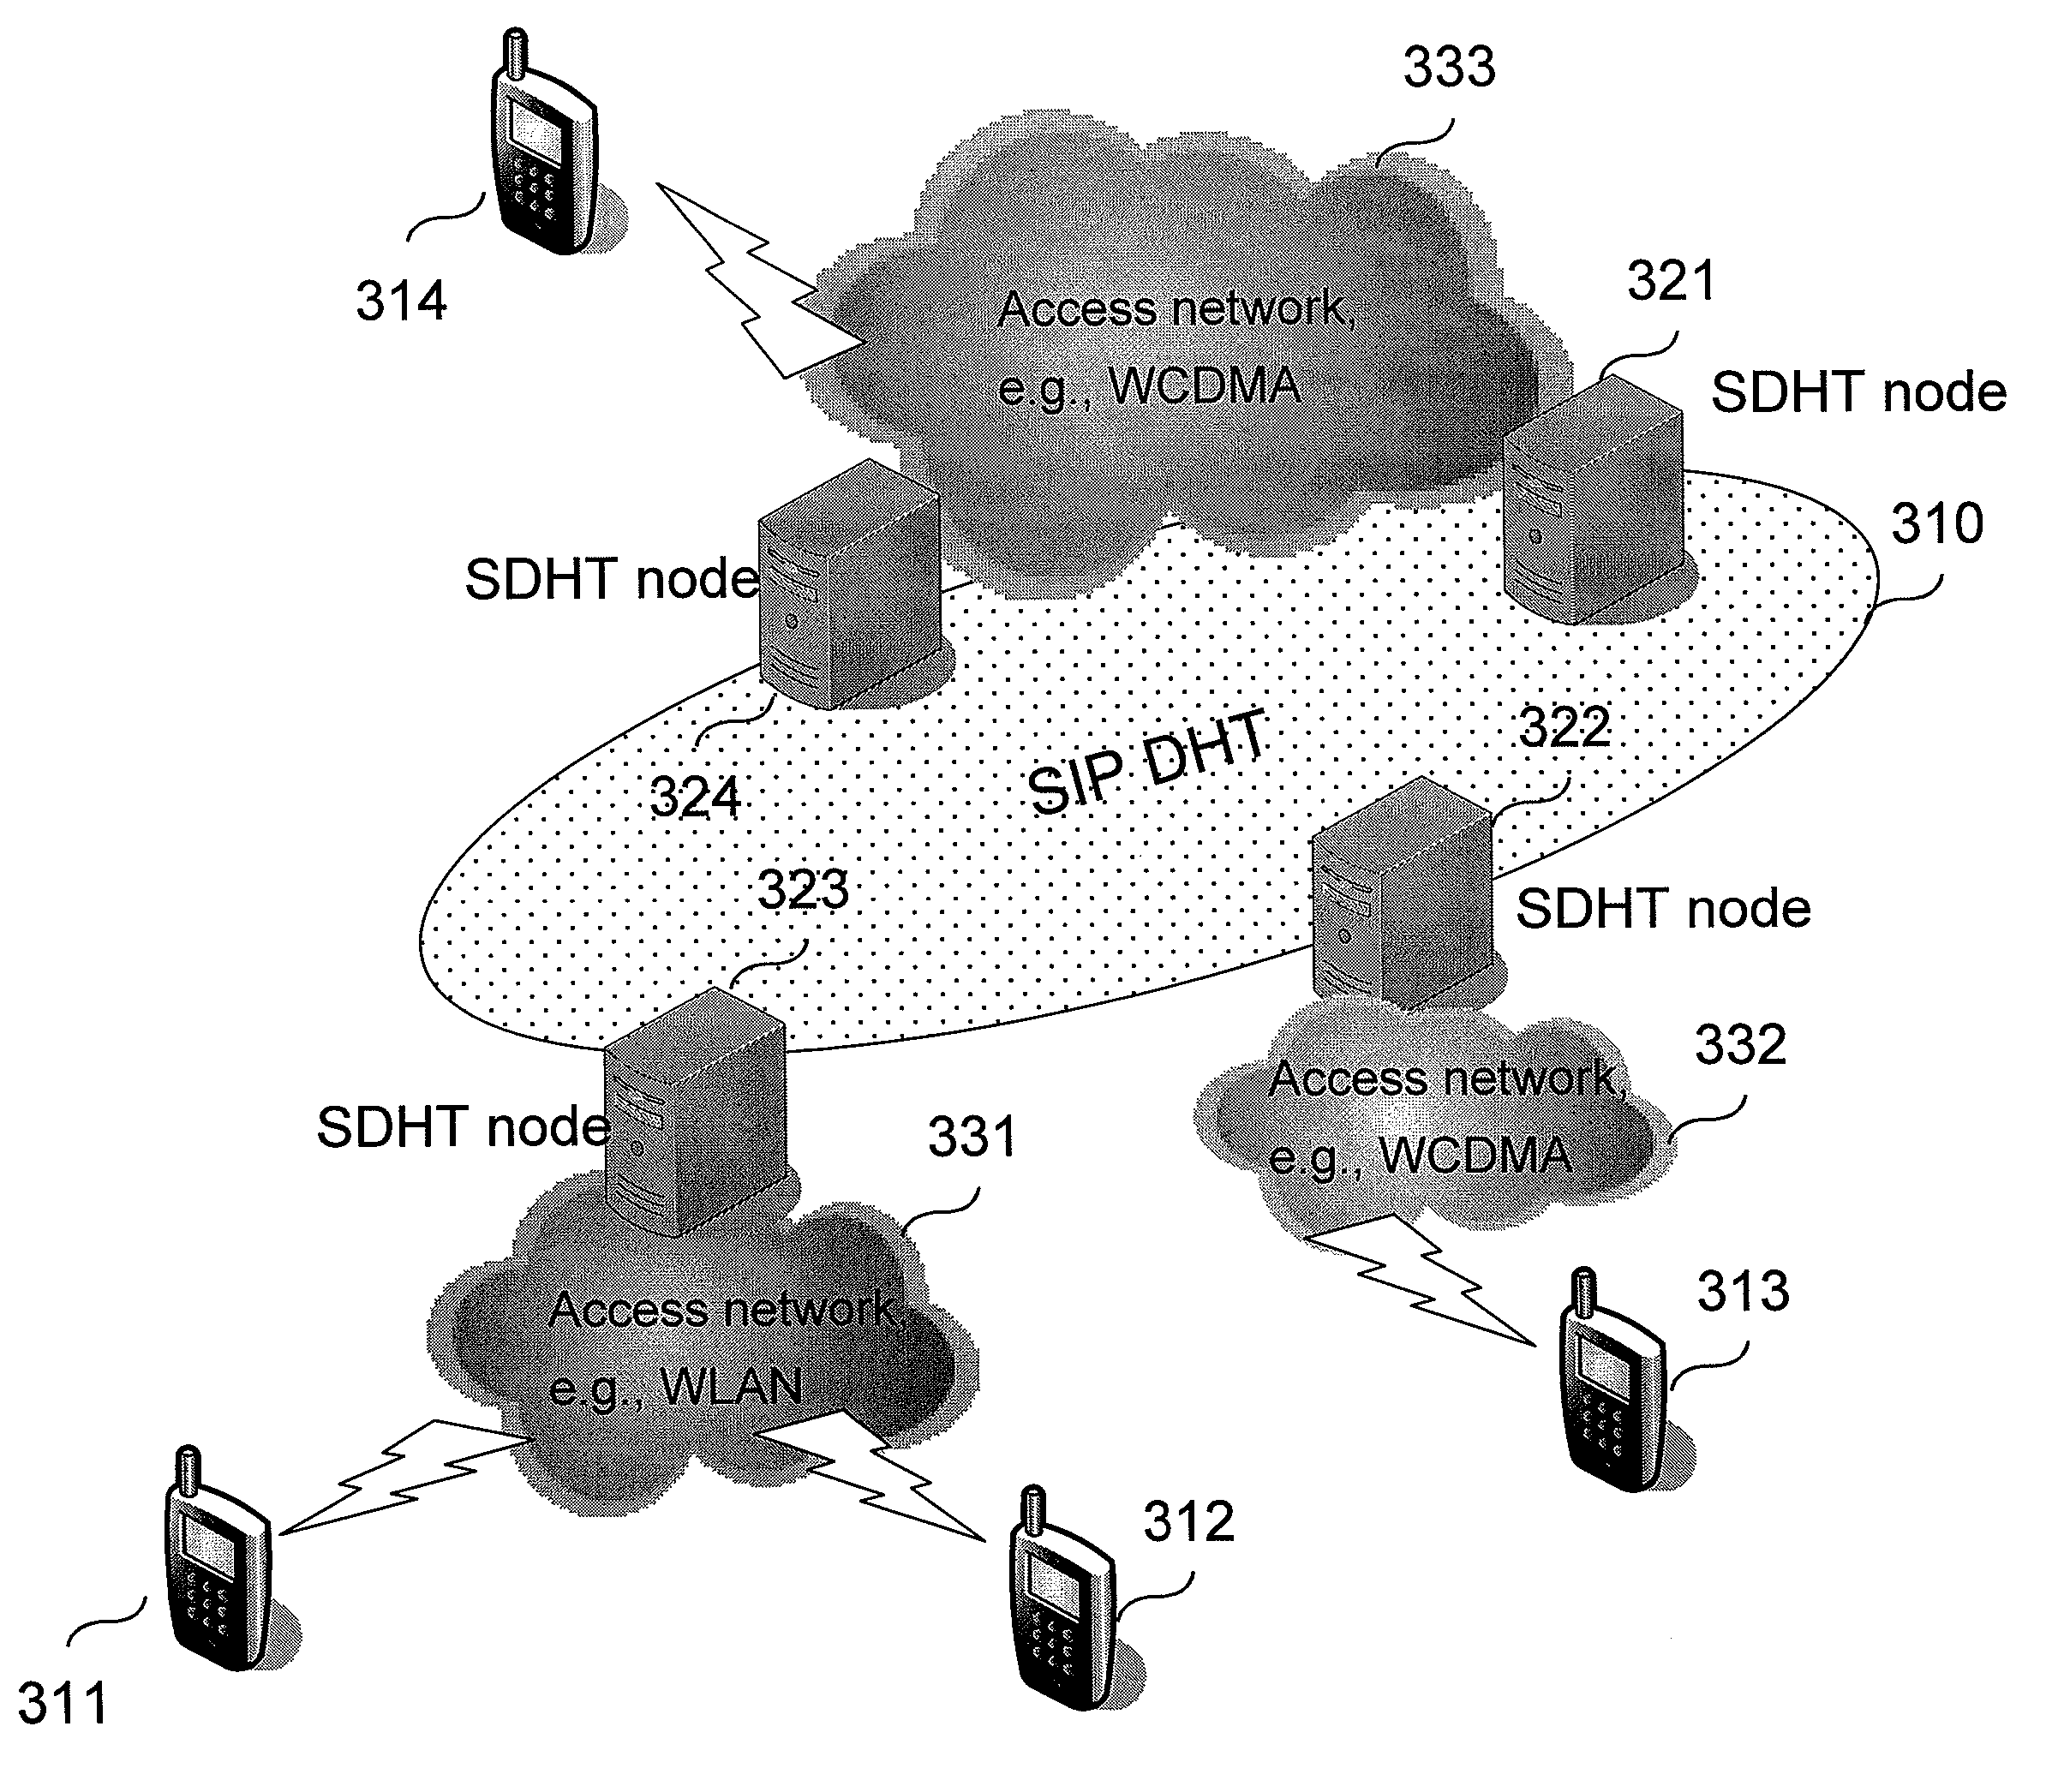 Method, System, and Devices for Network Sharing or Searching Of Resources